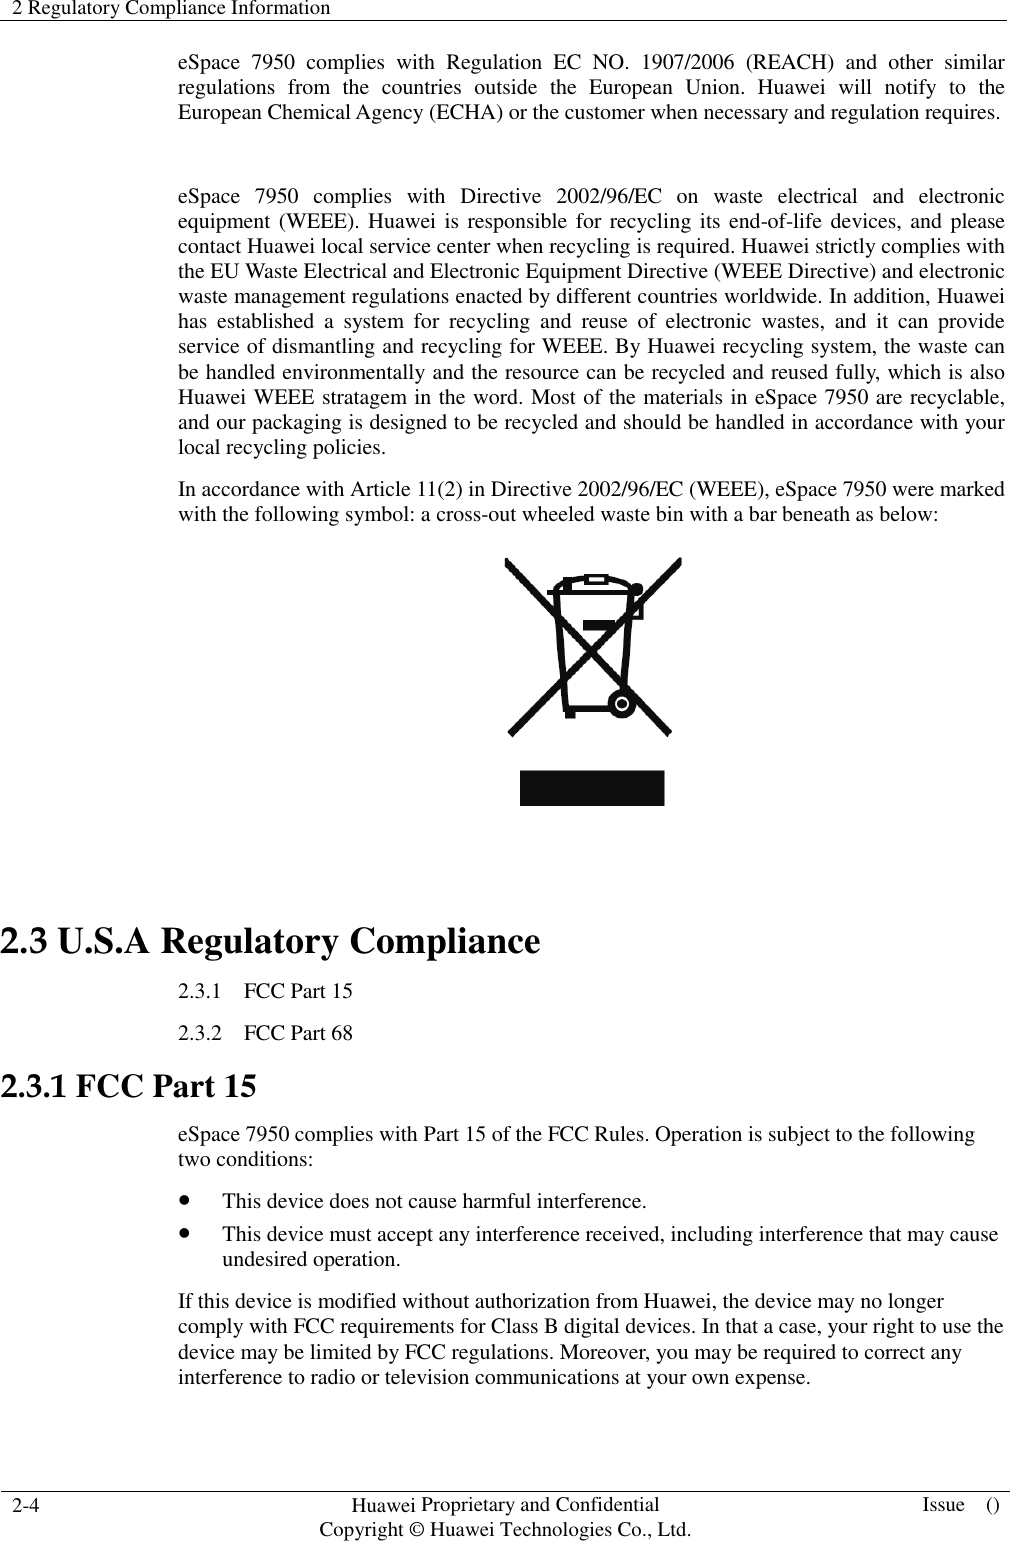 2 Regulatory Compliance Information     2-4  Huawei Proprietary and Confidential                                     Copyright © Huawei Technologies Co., Ltd.  Issue    ()  eSpace  7950  complies  with  Regulation  EC  NO.  1907/2006  (REACH)  and  other  similar regulations  from  the  countries  outside  the  European  Union.  Huawei  will  notify  to  the European Chemical Agency (ECHA) or the customer when necessary and regulation requires.  eSpace  7950  complies  with  Directive  2002/96/EC  on  waste  electrical  and  electronic equipment  (WEEE). Huawei is responsible for  recycling its end-of-life devices, and please contact Huawei local service center when recycling is required. Huawei strictly complies with the EU Waste Electrical and Electronic Equipment Directive (WEEE Directive) and electronic waste management regulations enacted by different countries worldwide. In addition, Huawei has  established  a  system  for  recycling  and  reuse  of  electronic  wastes,  and  it  can  provide service of dismantling and recycling for WEEE. By Huawei recycling system, the waste can be handled environmentally and the resource can be recycled and reused fully, which is also Huawei WEEE stratagem in the word. Most of the materials in eSpace 7950 are recyclable, and our packaging is designed to be recycled and should be handled in accordance with your local recycling policies.   In accordance with Article 11(2) in Directive 2002/96/EC (WEEE), eSpace 7950 were marked with the following symbol: a cross-out wheeled waste bin with a bar beneath as below:   2.3 U.S.A Regulatory Compliance 2.3.1    FCC Part 15 2.3.2    FCC Part 68 2.3.1 FCC Part 15 eSpace 7950 complies with Part 15 of the FCC Rules. Operation is subject to the following two conditions:  This device does not cause harmful interference.  This device must accept any interference received, including interference that may cause undesired operation. If this device is modified without authorization from Huawei, the device may no longer comply with FCC requirements for Class B digital devices. In that a case, your right to use the device may be limited by FCC regulations. Moreover, you may be required to correct any interference to radio or television communications at your own expense. 